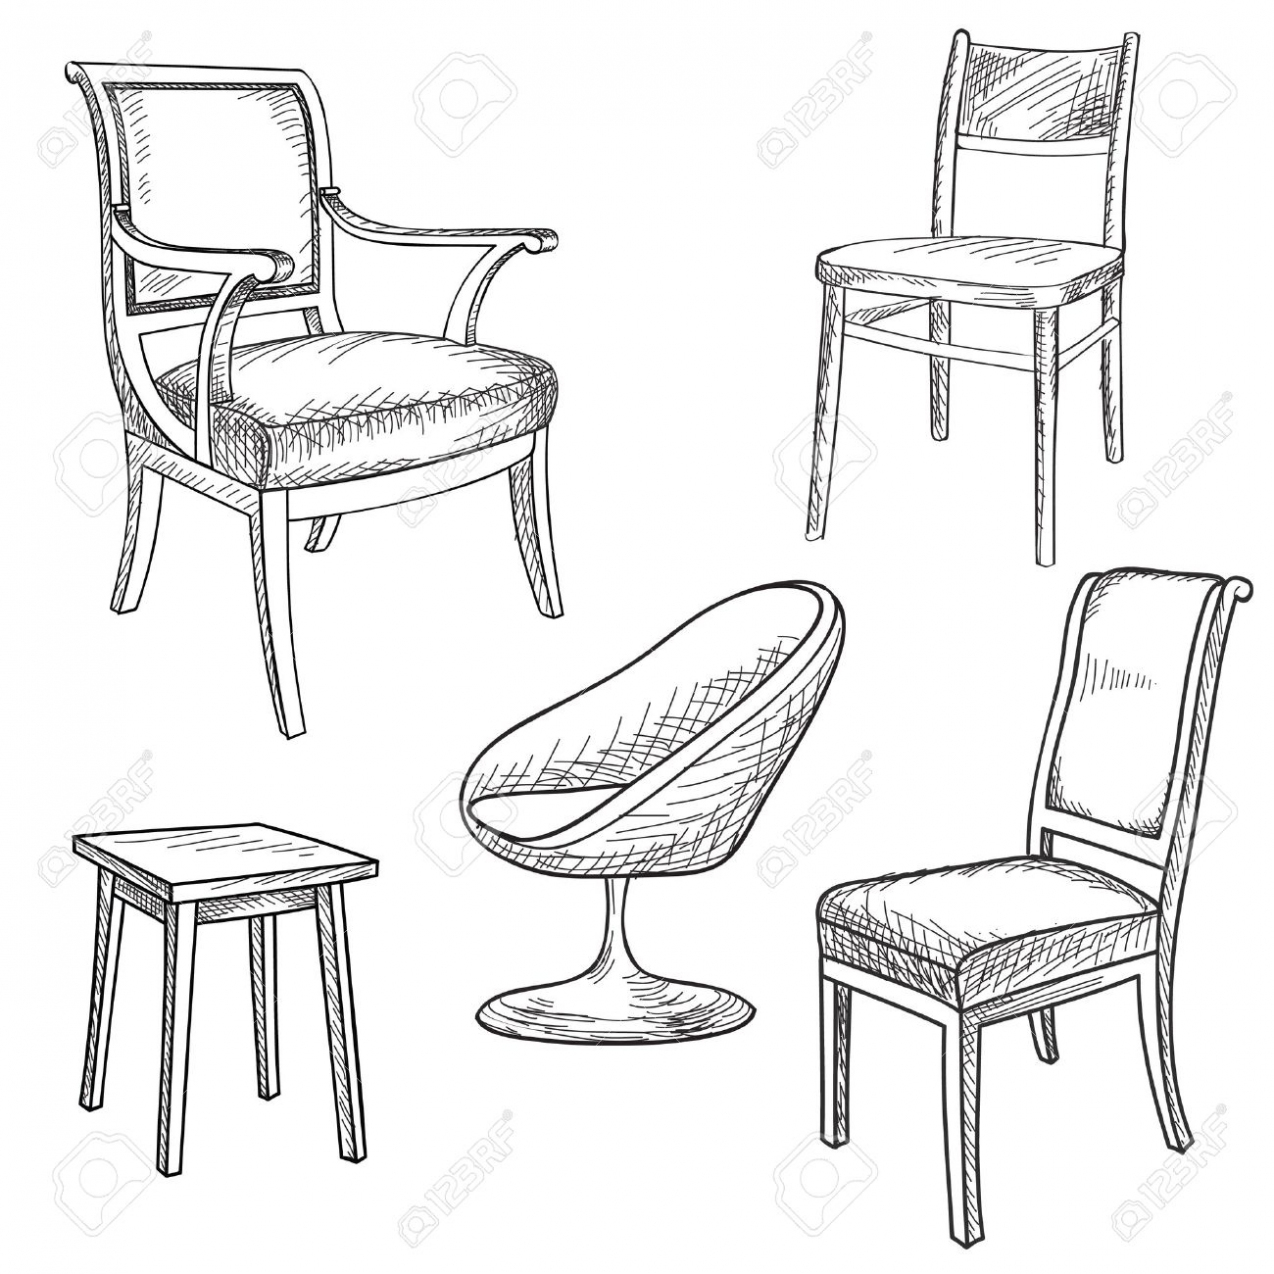 The best free Furniture drawing images. Download from 595 free drawings